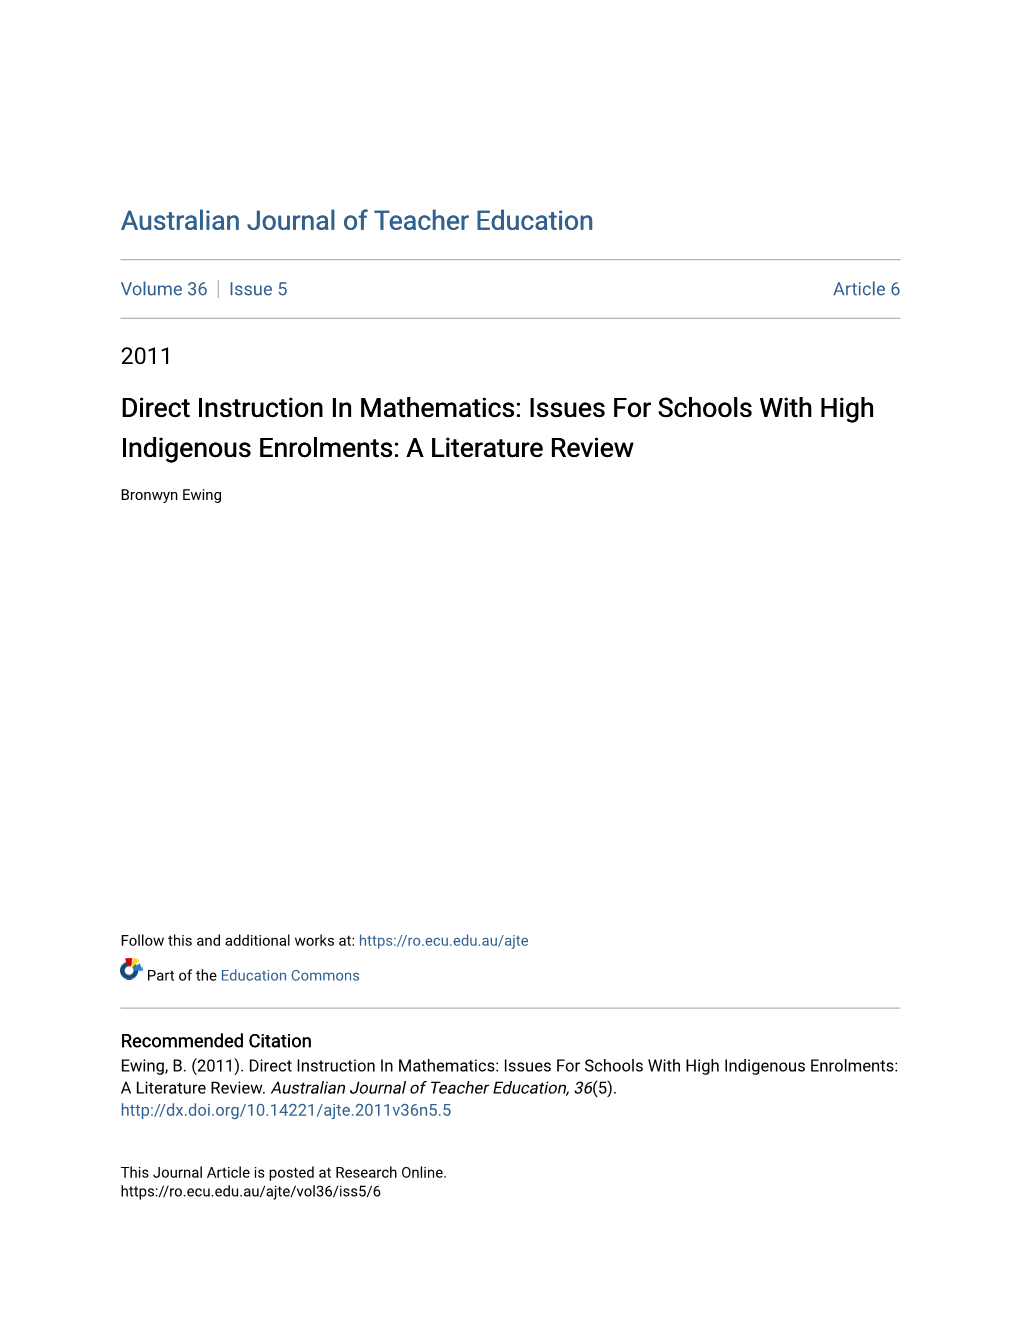 Direct Instruction in Mathematics: Issues for Schools with High Indigenous Enrolments: a Literature Review